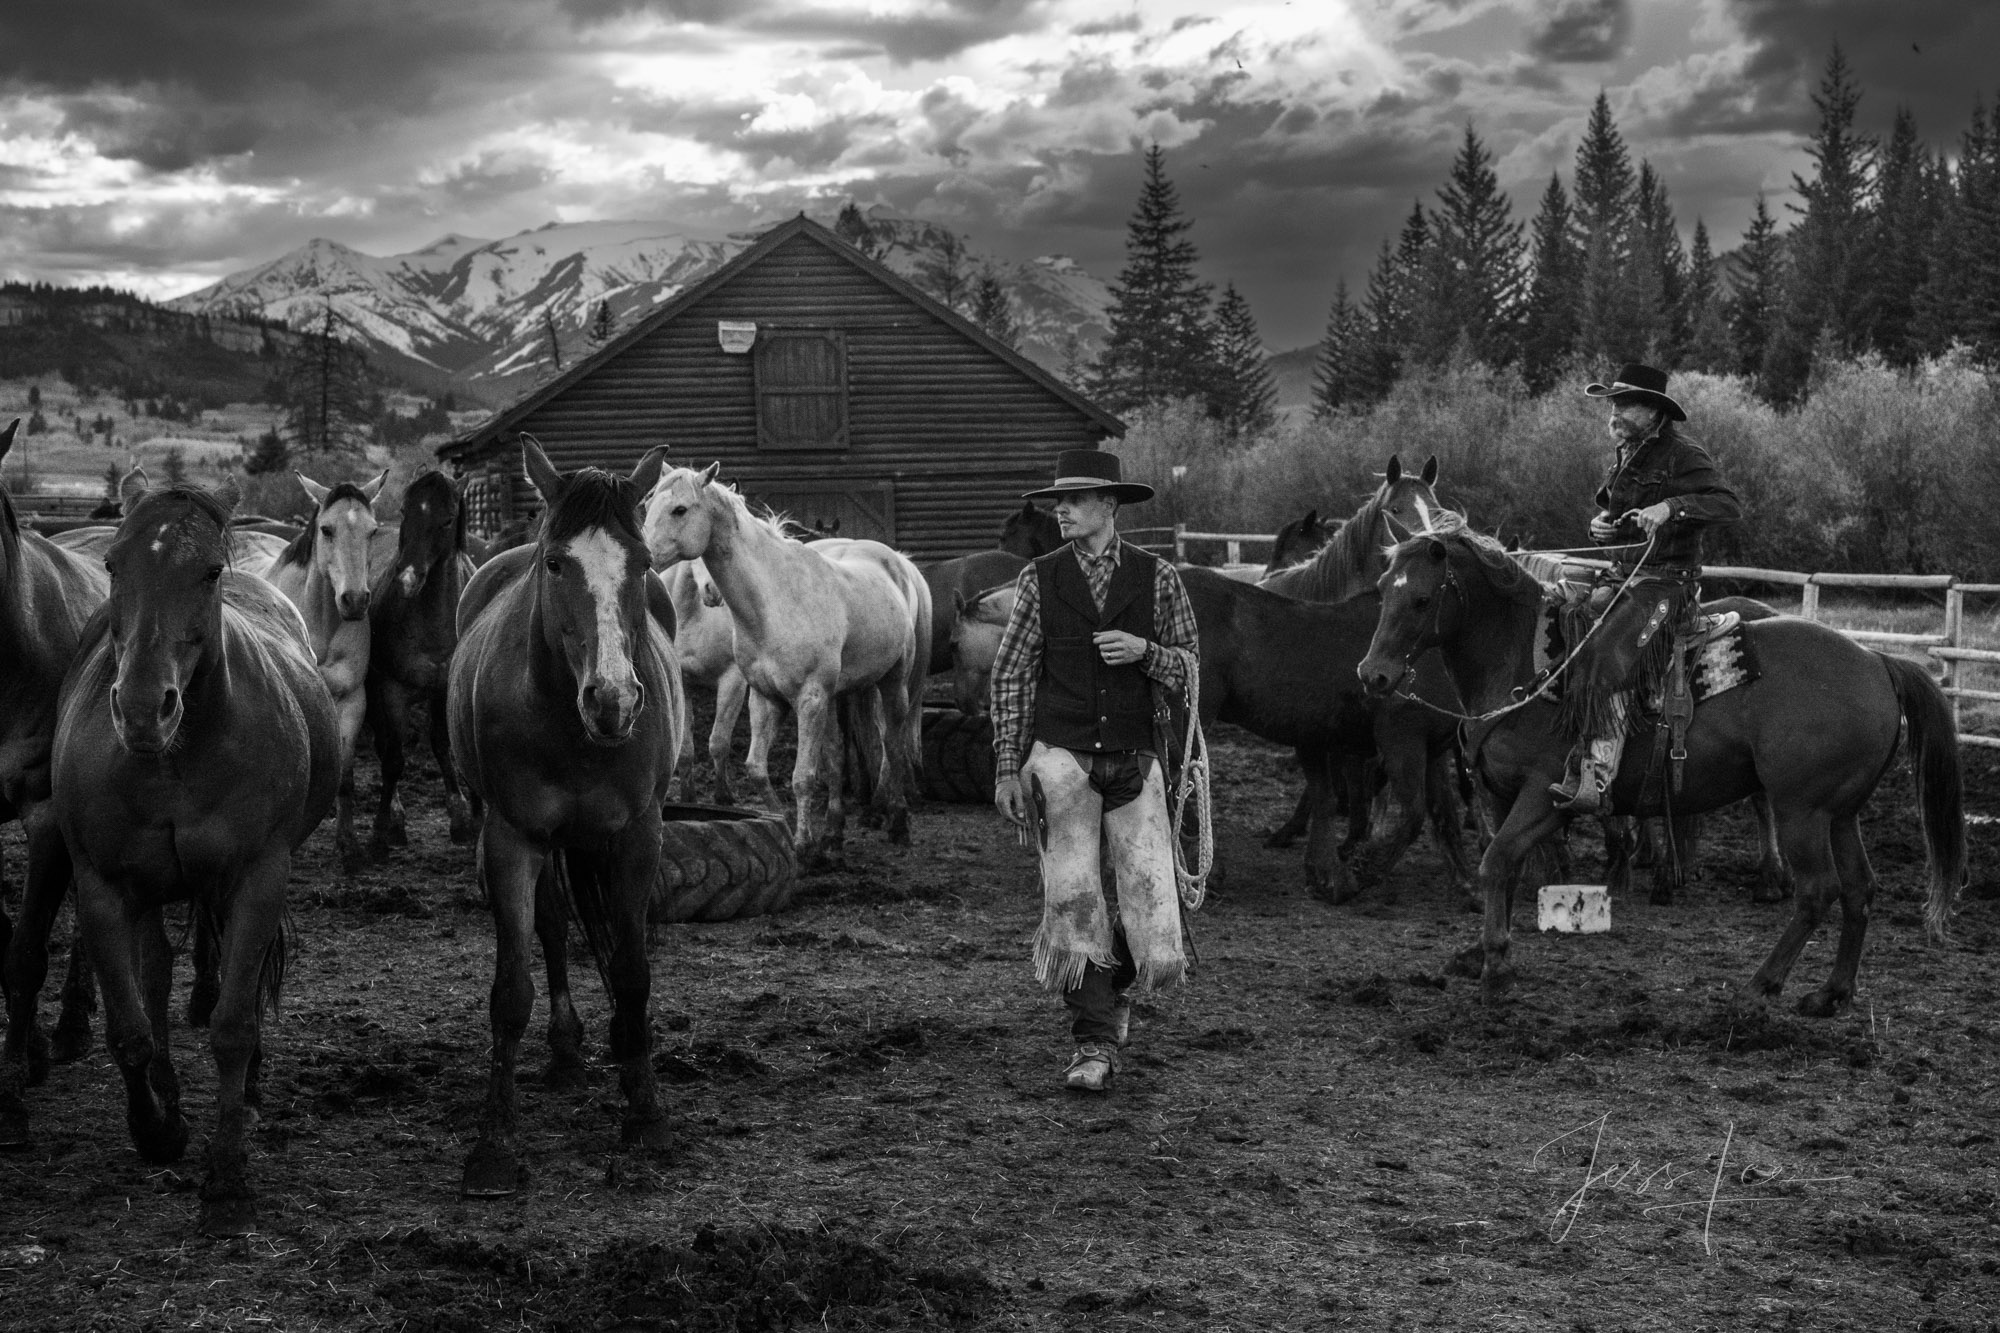 Fine Art Limited Edition Photo Prints of Cowboys, Horses, and life in the West. Morning Pickup, a Cowboy picture in black and...